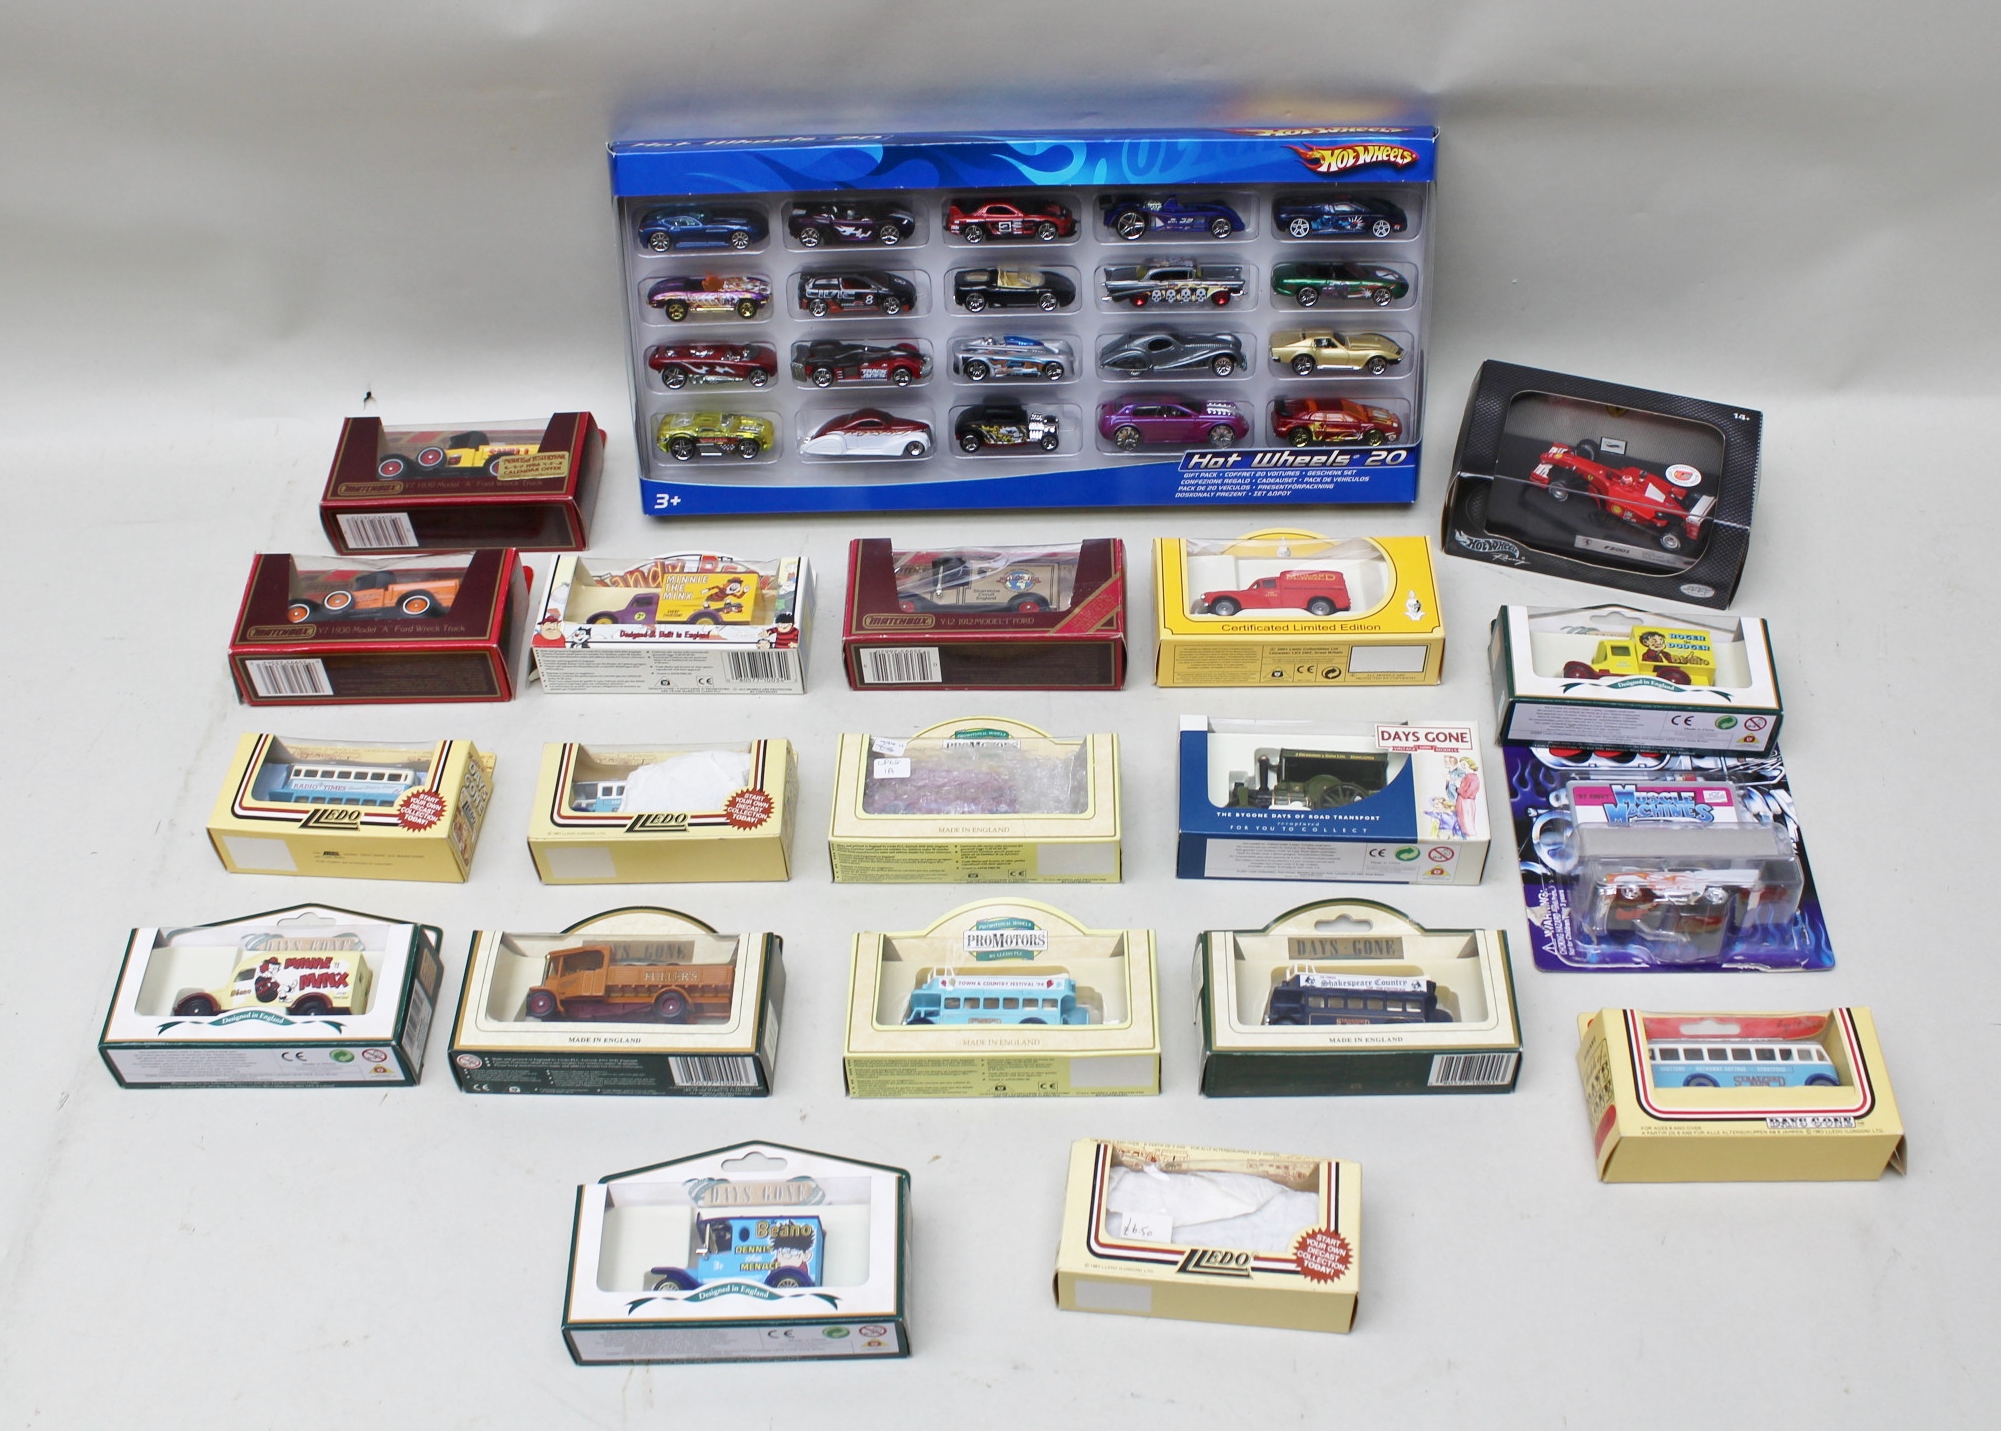 CORGI DIE-CAST VEHICLE SETS including Dandy Desperate Dan & Corky the Cat, Fo the Bear and Beryl the